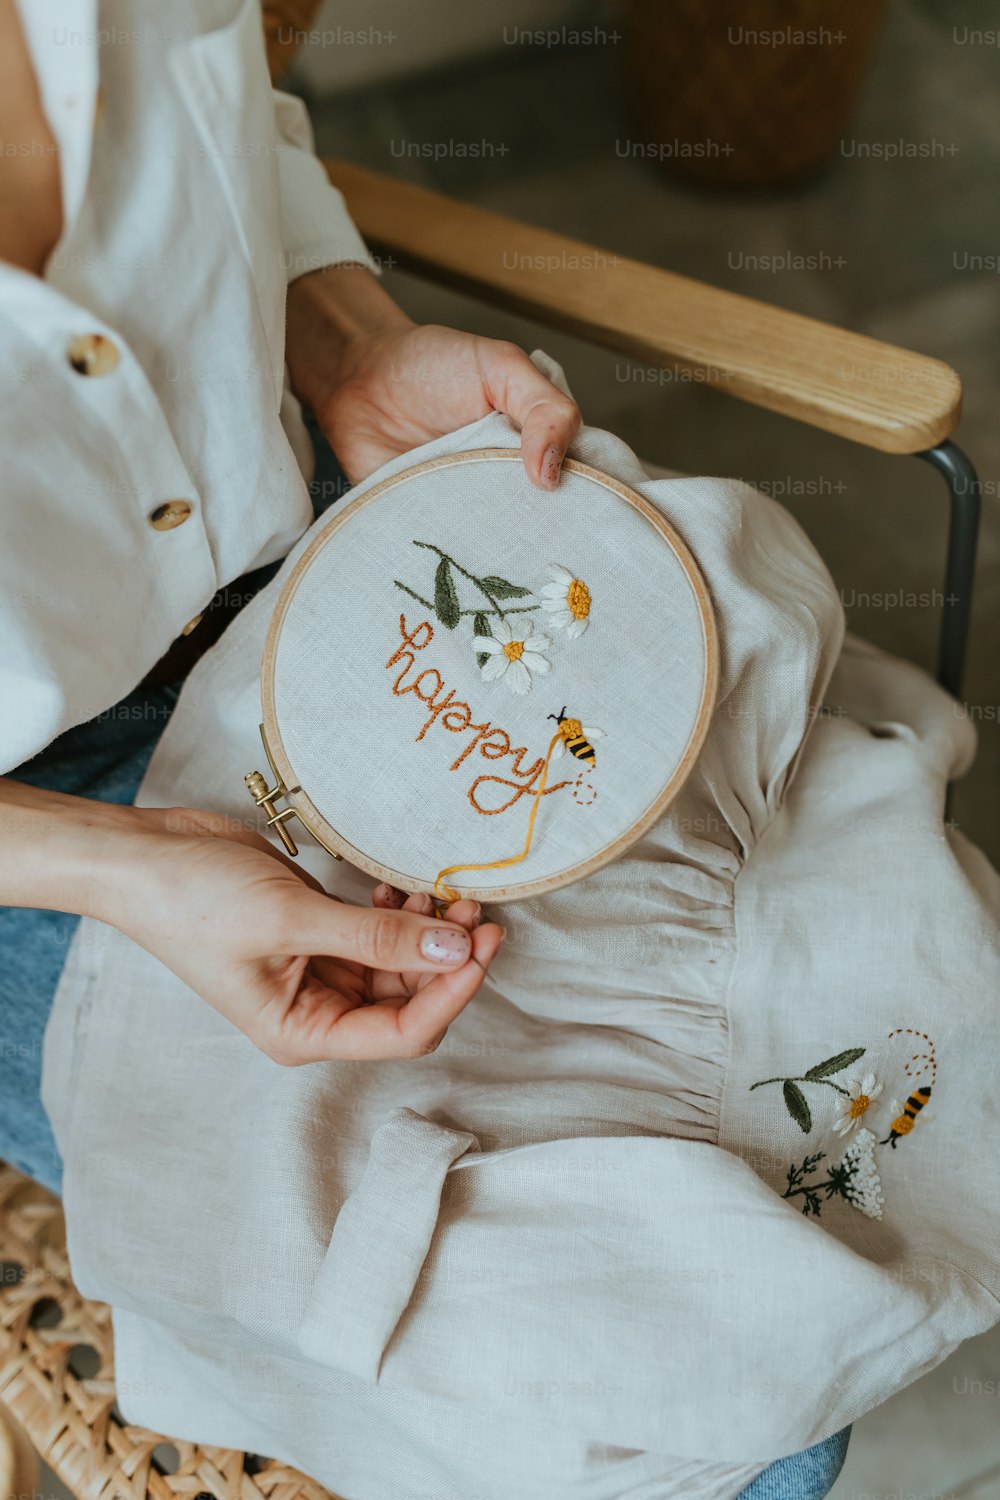 Embroidery Hoop Pictures  Download Free Images on Unsplash